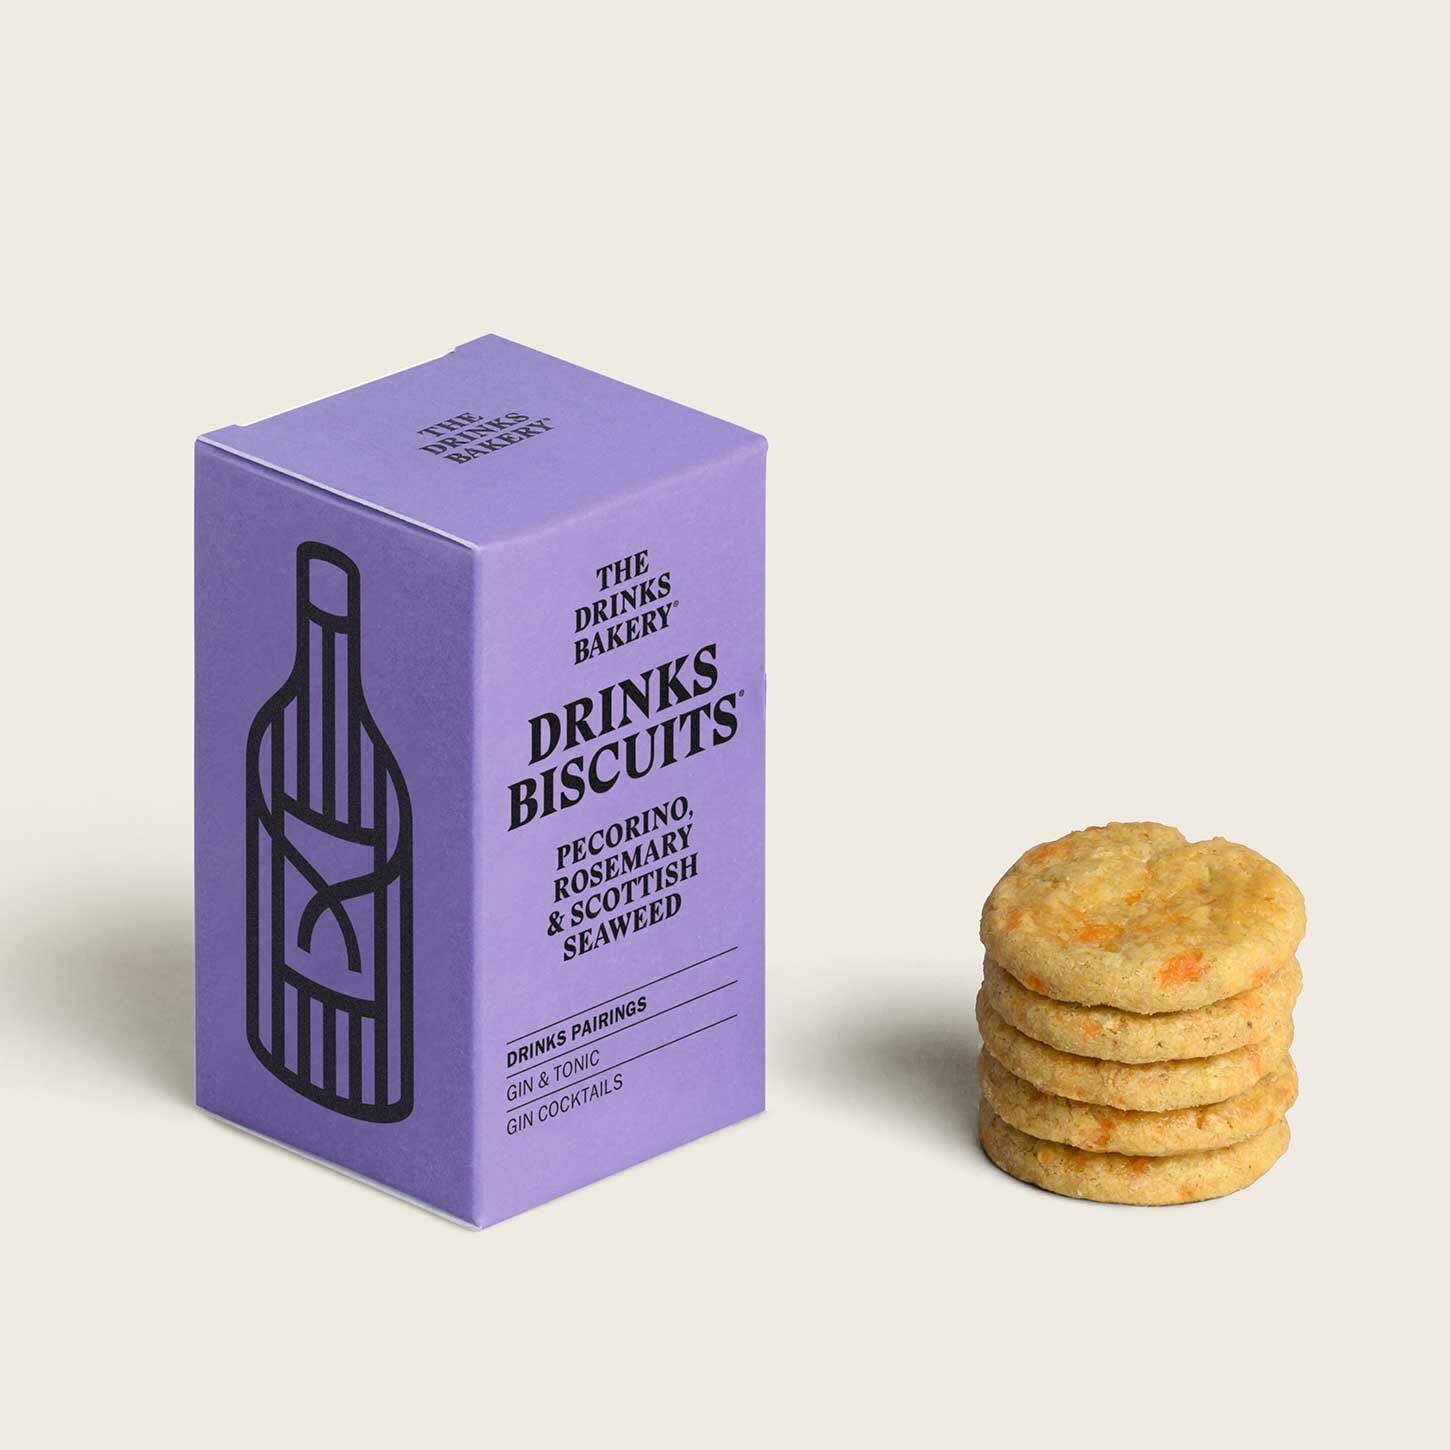 Pecorino, Rosemary & Seaweed Drinks Biscuits by The Drinks Bakery